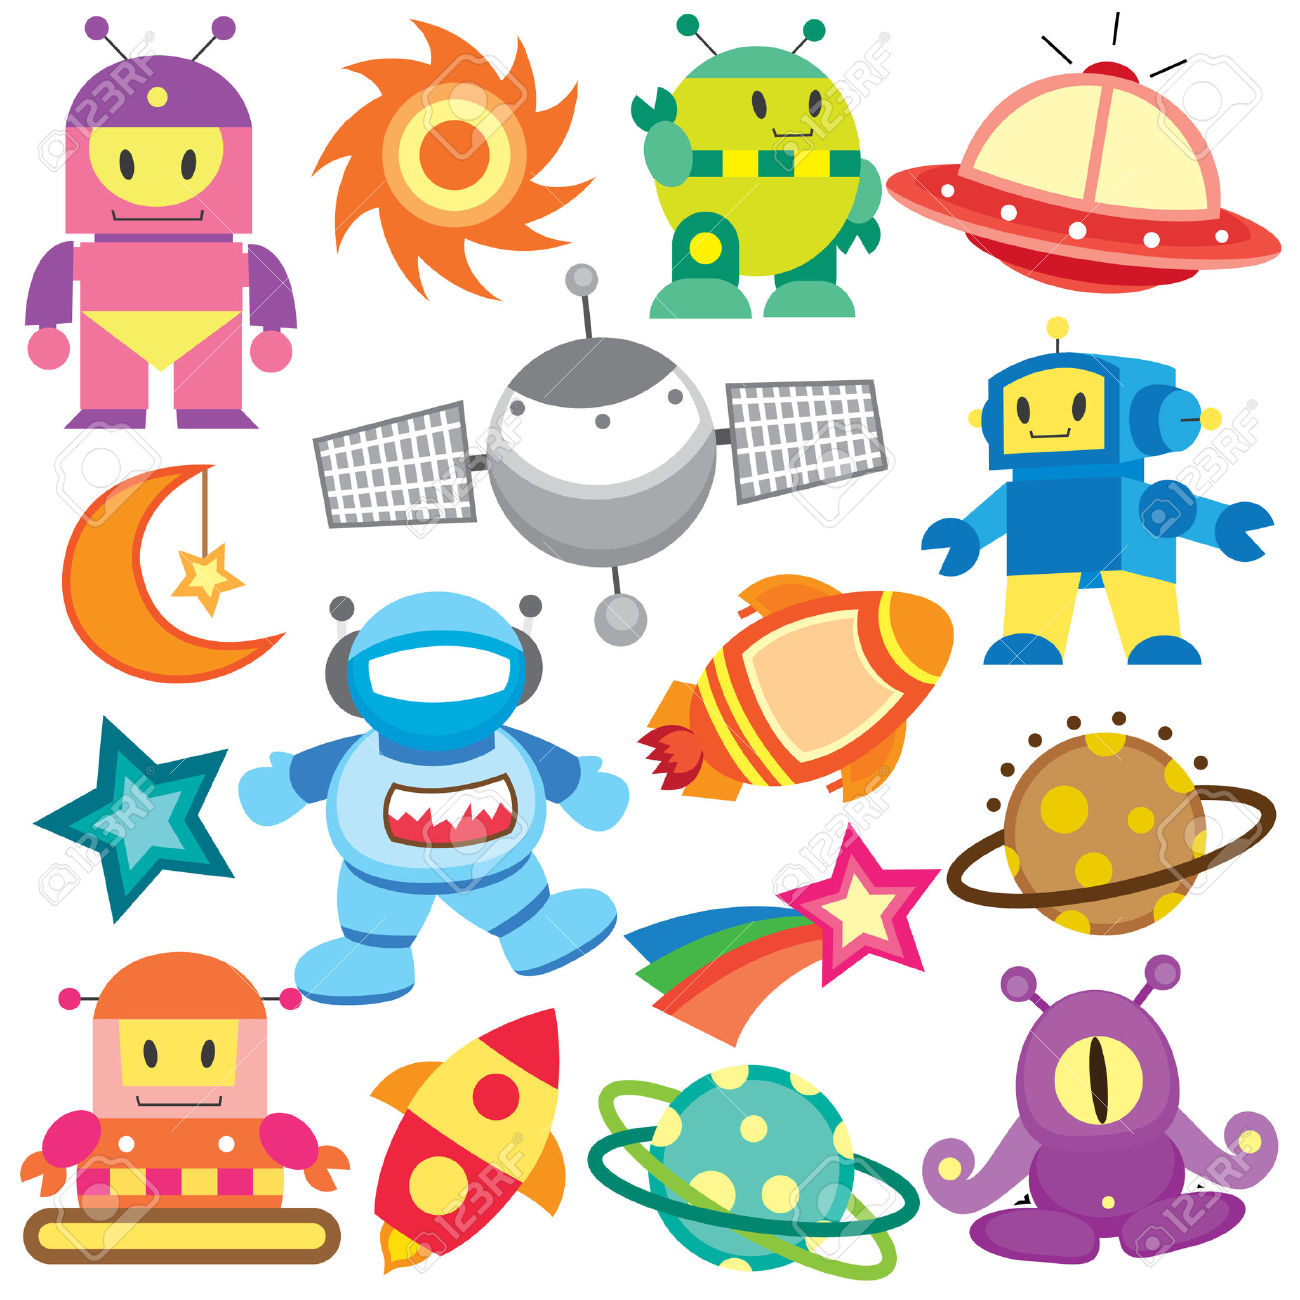 Outer Space Clipart - Blogsbe - Outer Space Clipart